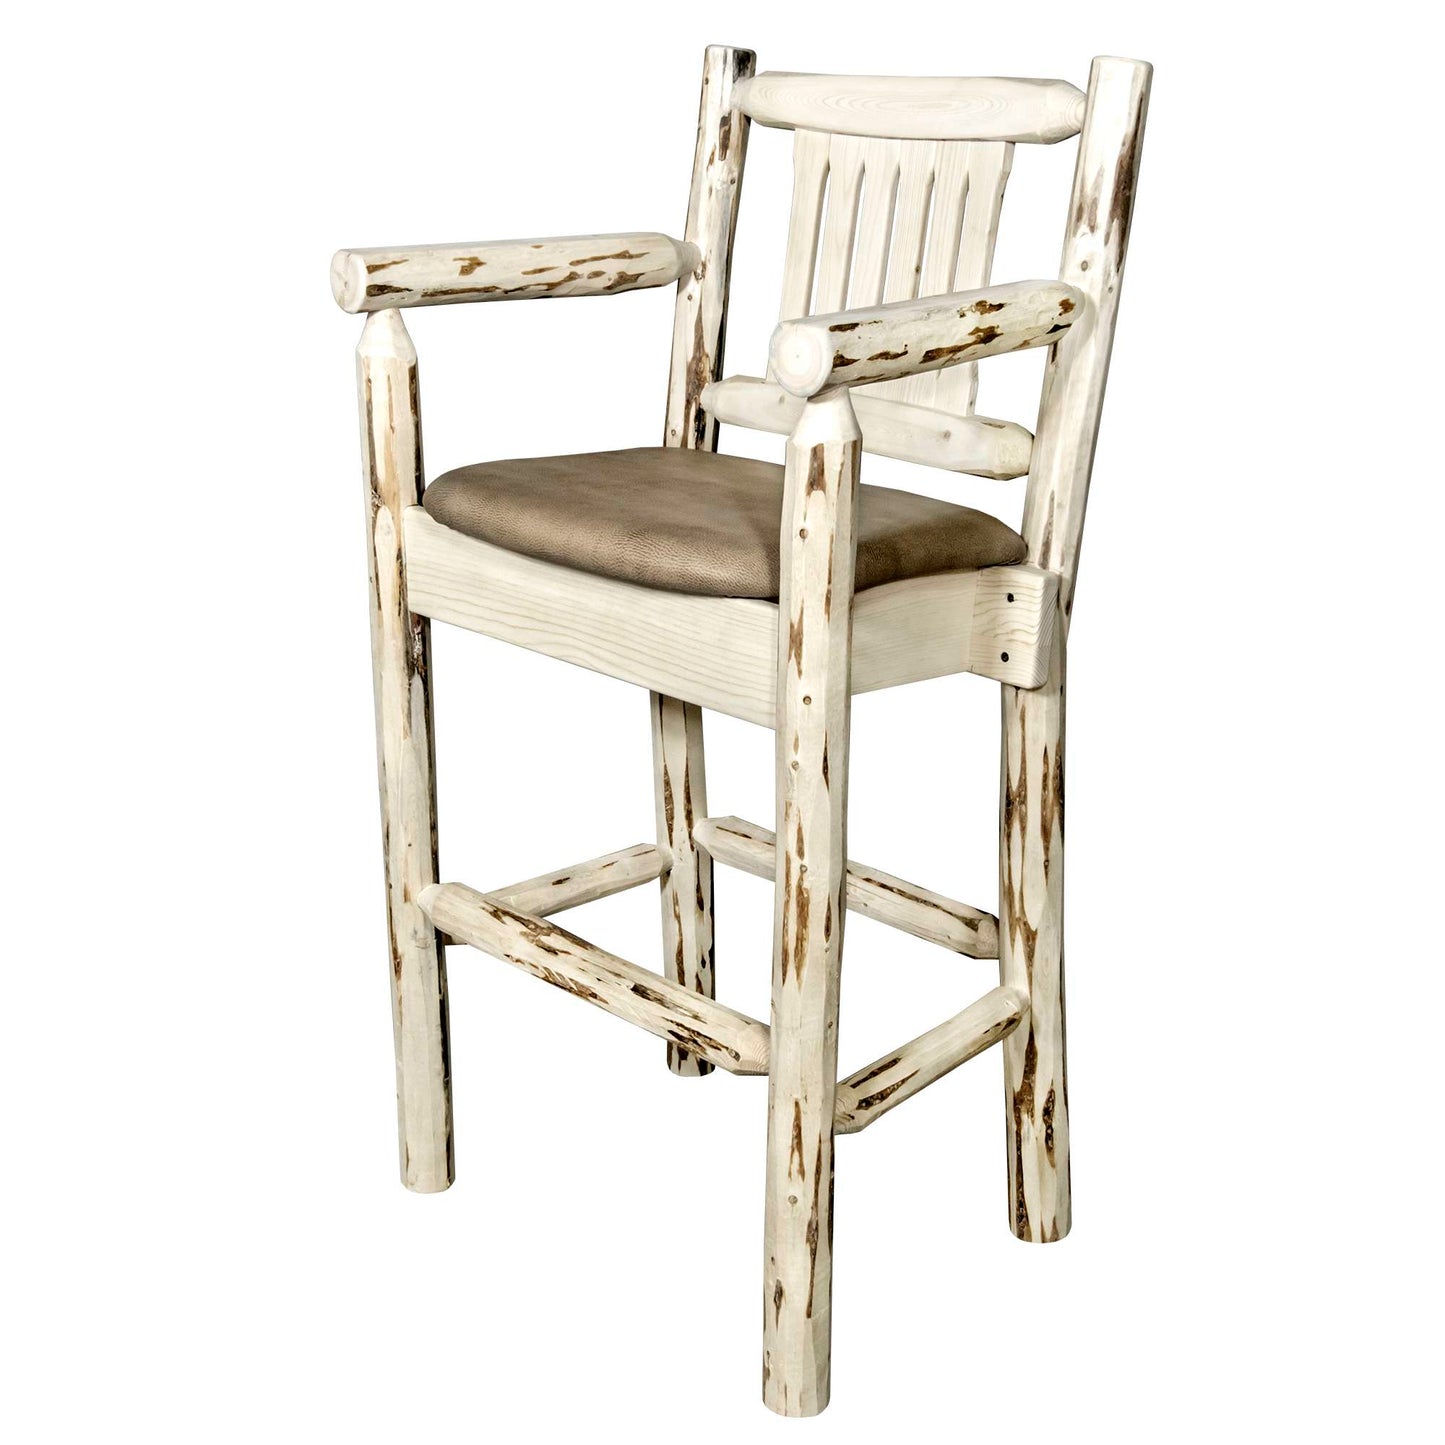 Montana Woodworks - Montana Collection Counter Height Captain's Barstool - Buckskin Upholstery, Clear Lacquer Finish  - 38 in